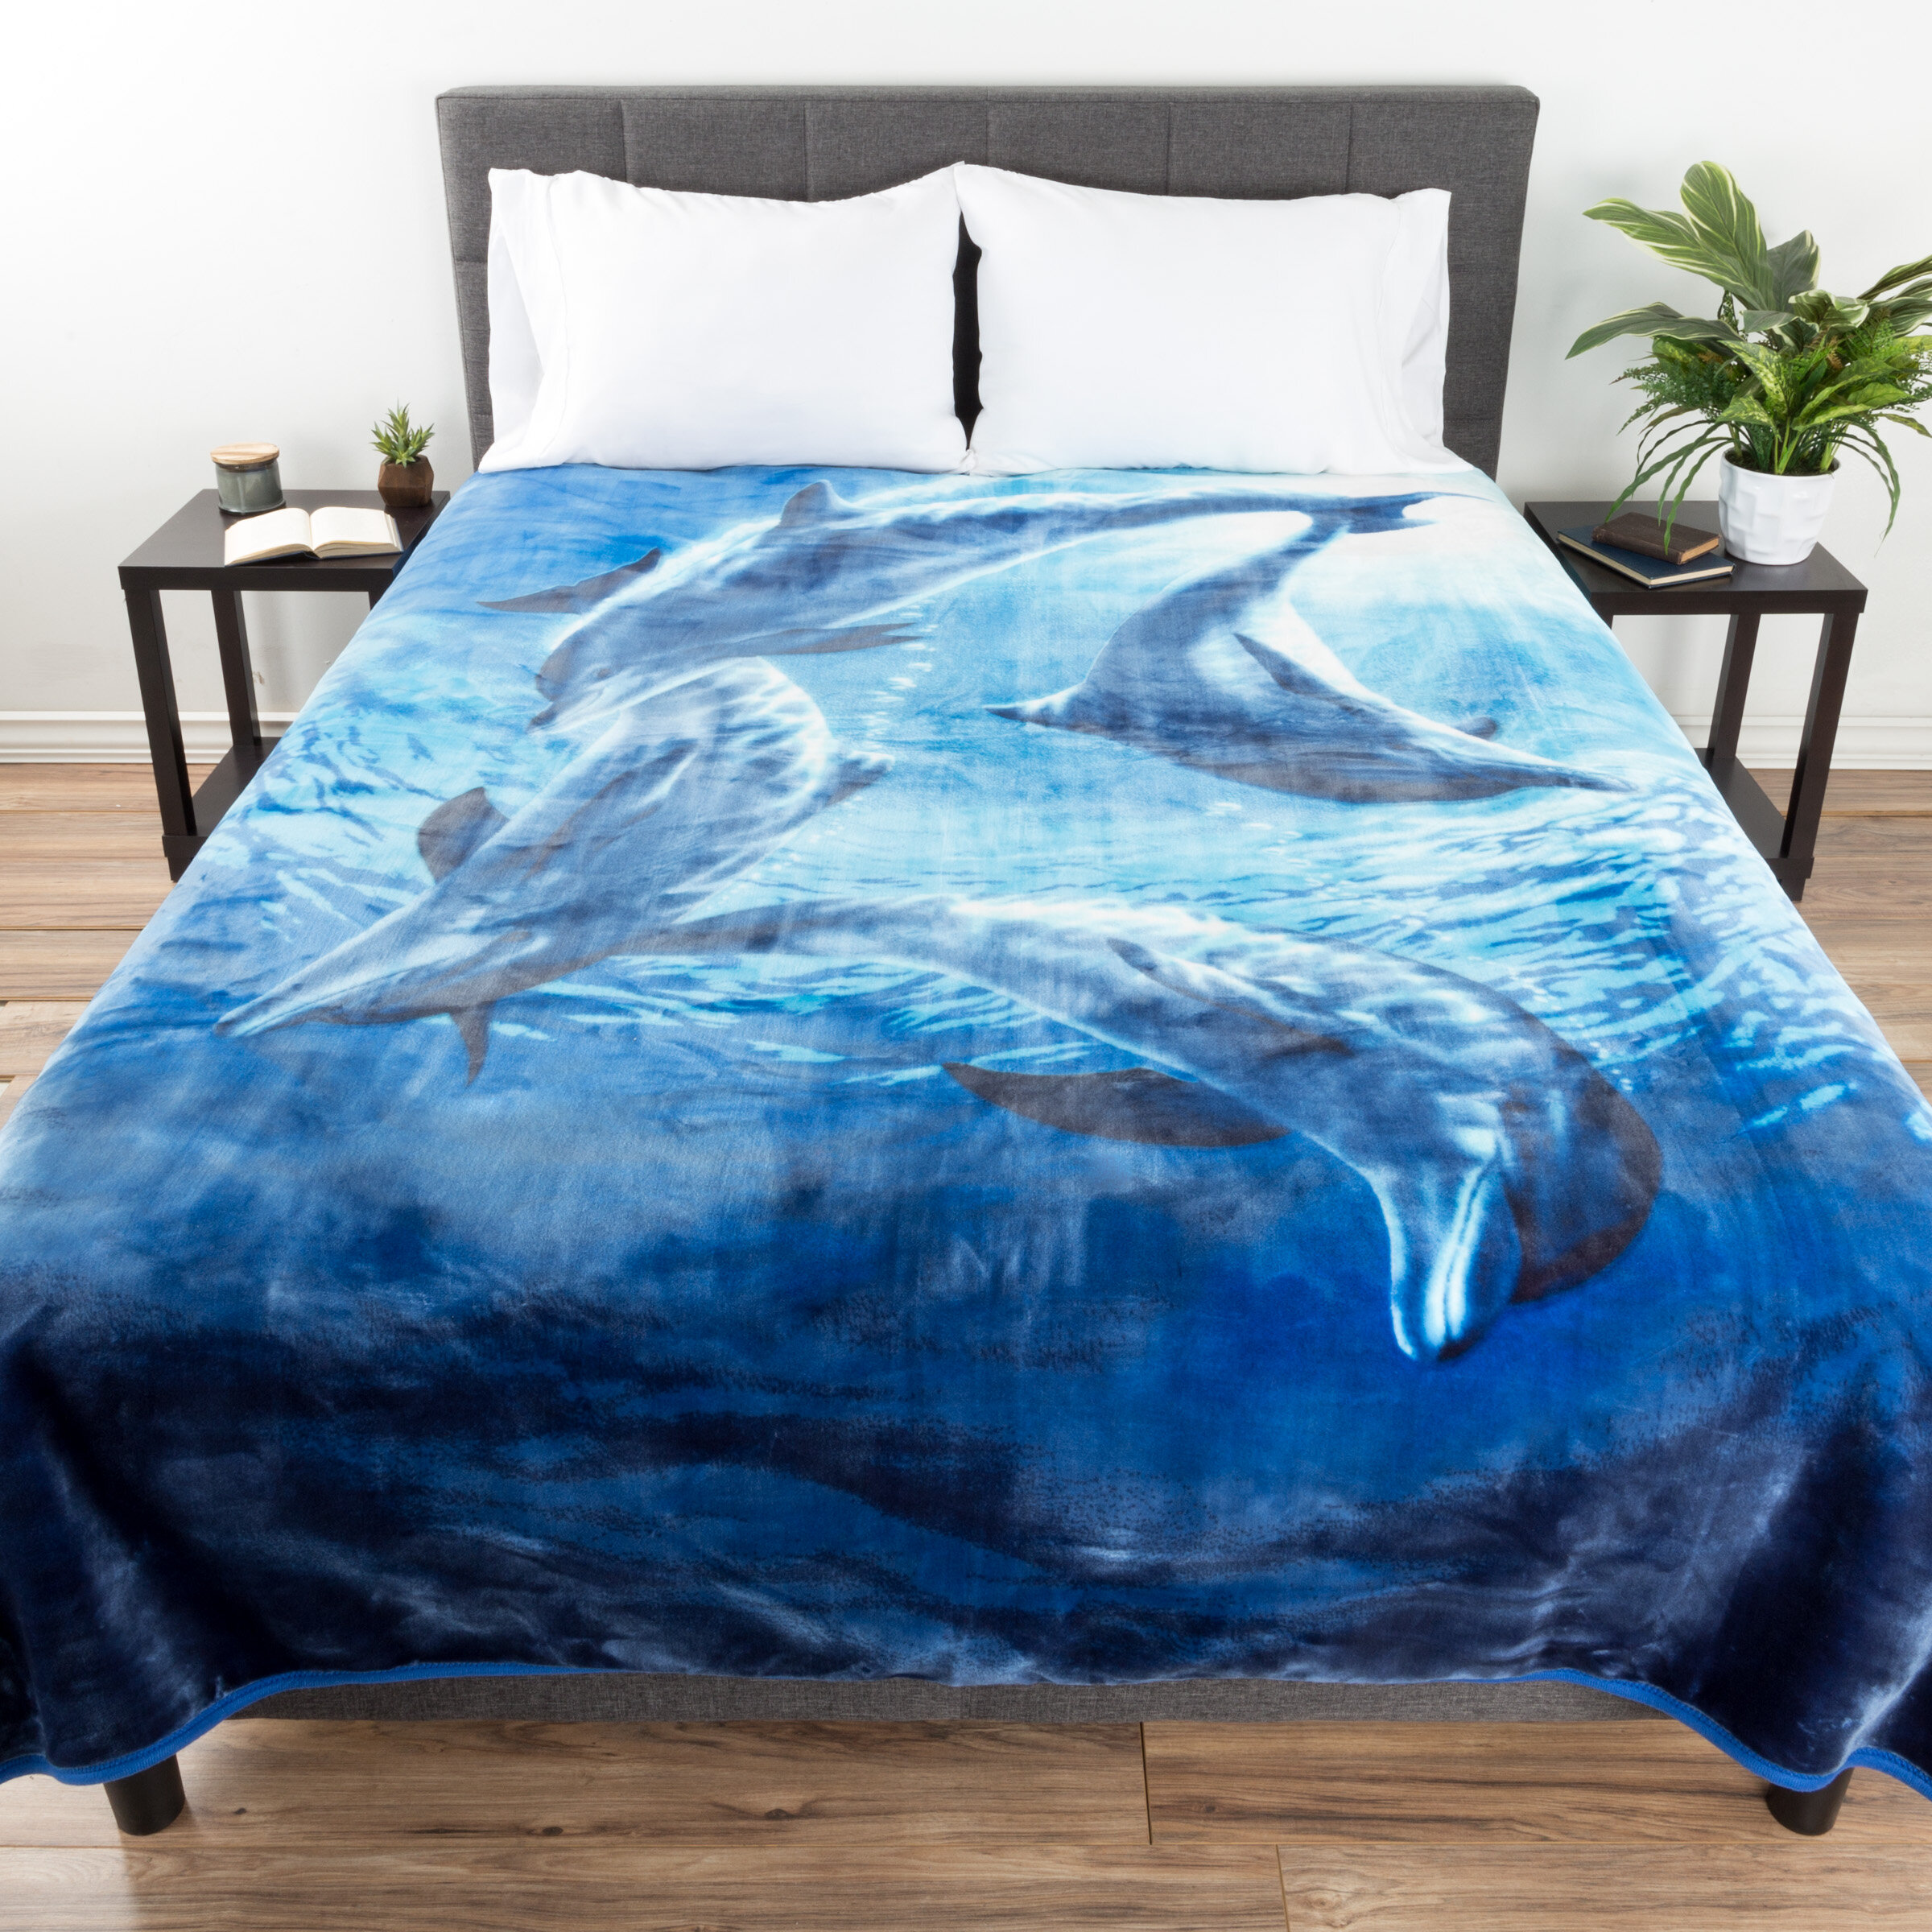 DOLPHIN DOLPHINS KING SIZE BLANKET BEDSPREAD 